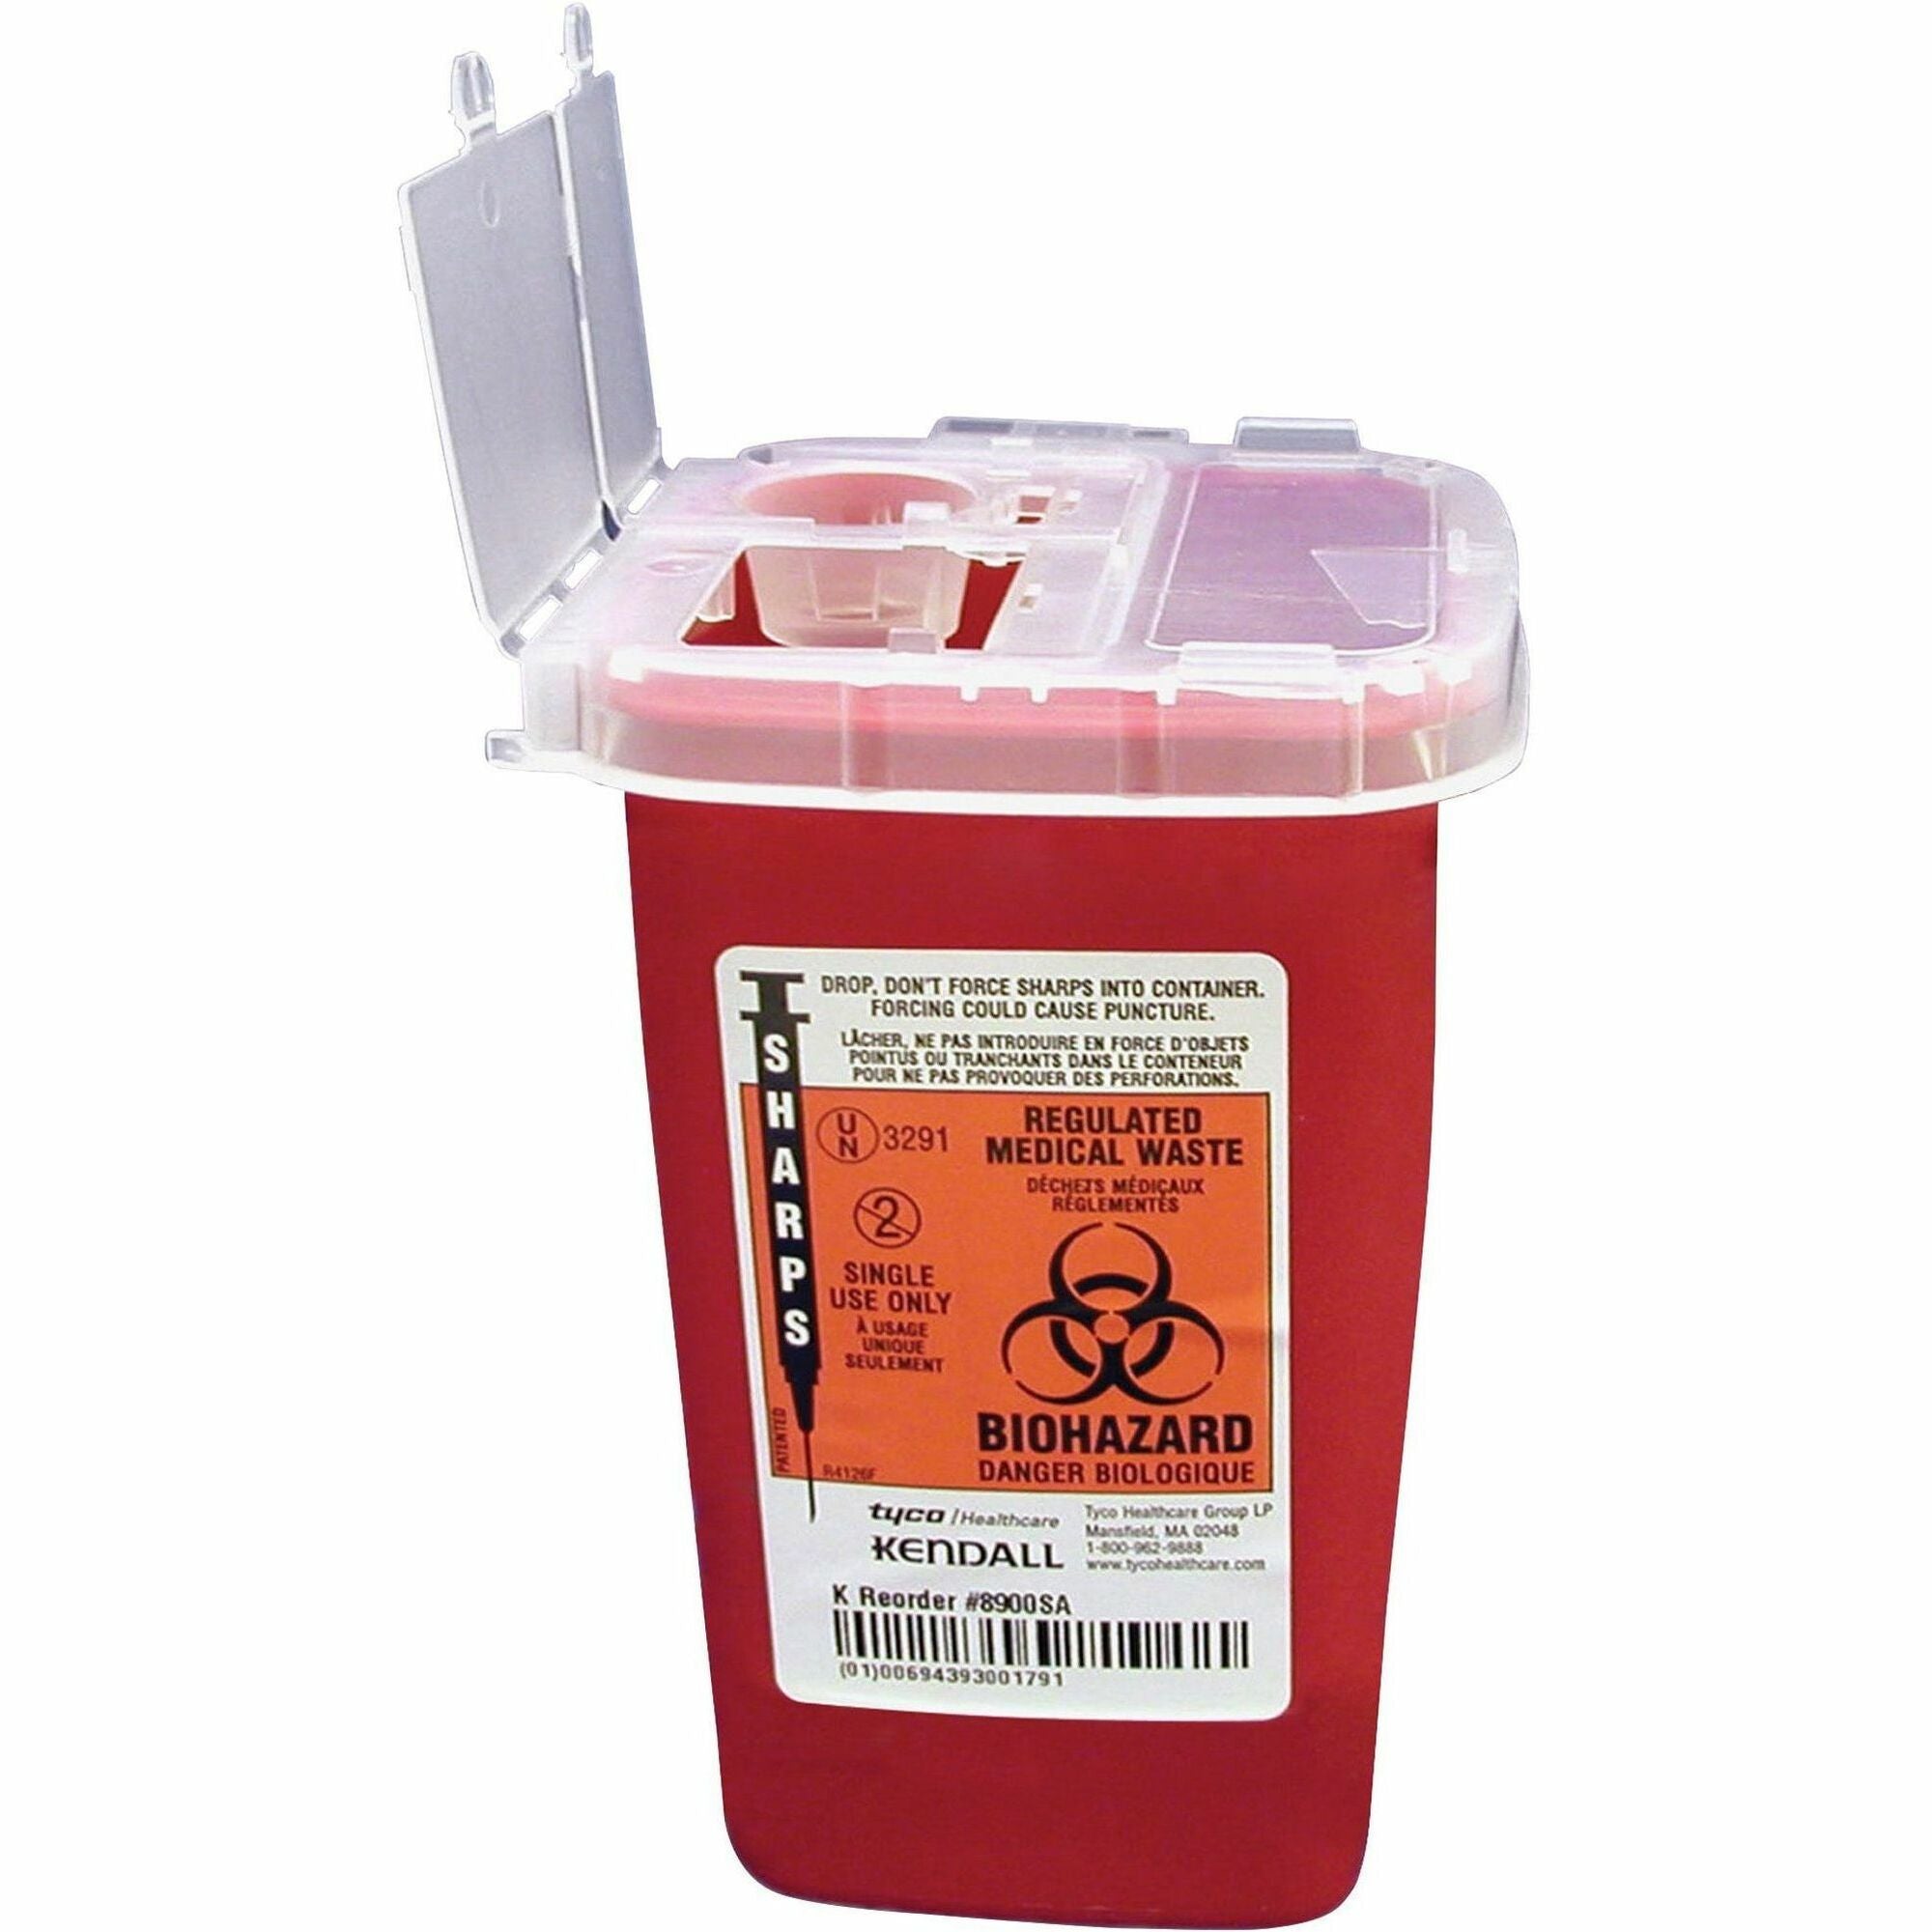 Covidien Sharps Medical Waste Container - 1 quart Capacity - 6.3" Height x 4.5" Width x 4.3" Depth - Red - 1 Each - 